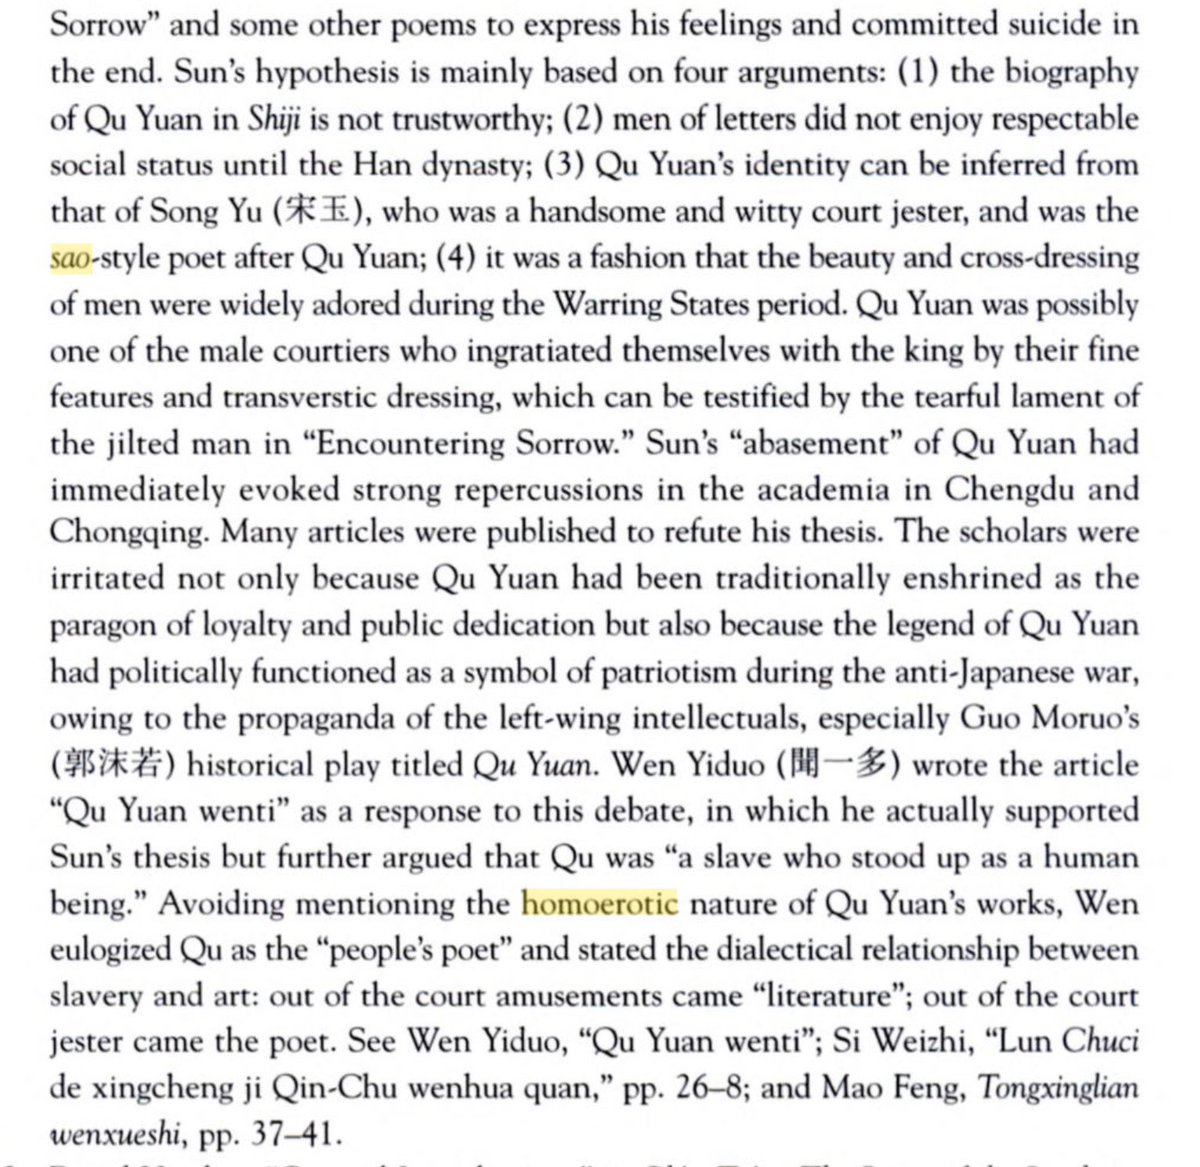 OMG a scholar Sun Cizhou in 1944 suggested Qu Yuan might have been gay for his king but he got shot down BC THEY RAISED QU YUAN AS A SYMBOL OF PATRIOTISM FOR THE CN-JP WAR IM—anyway you heard it here. At least one native scholar suggested that rice dumpling guy mighta been gay